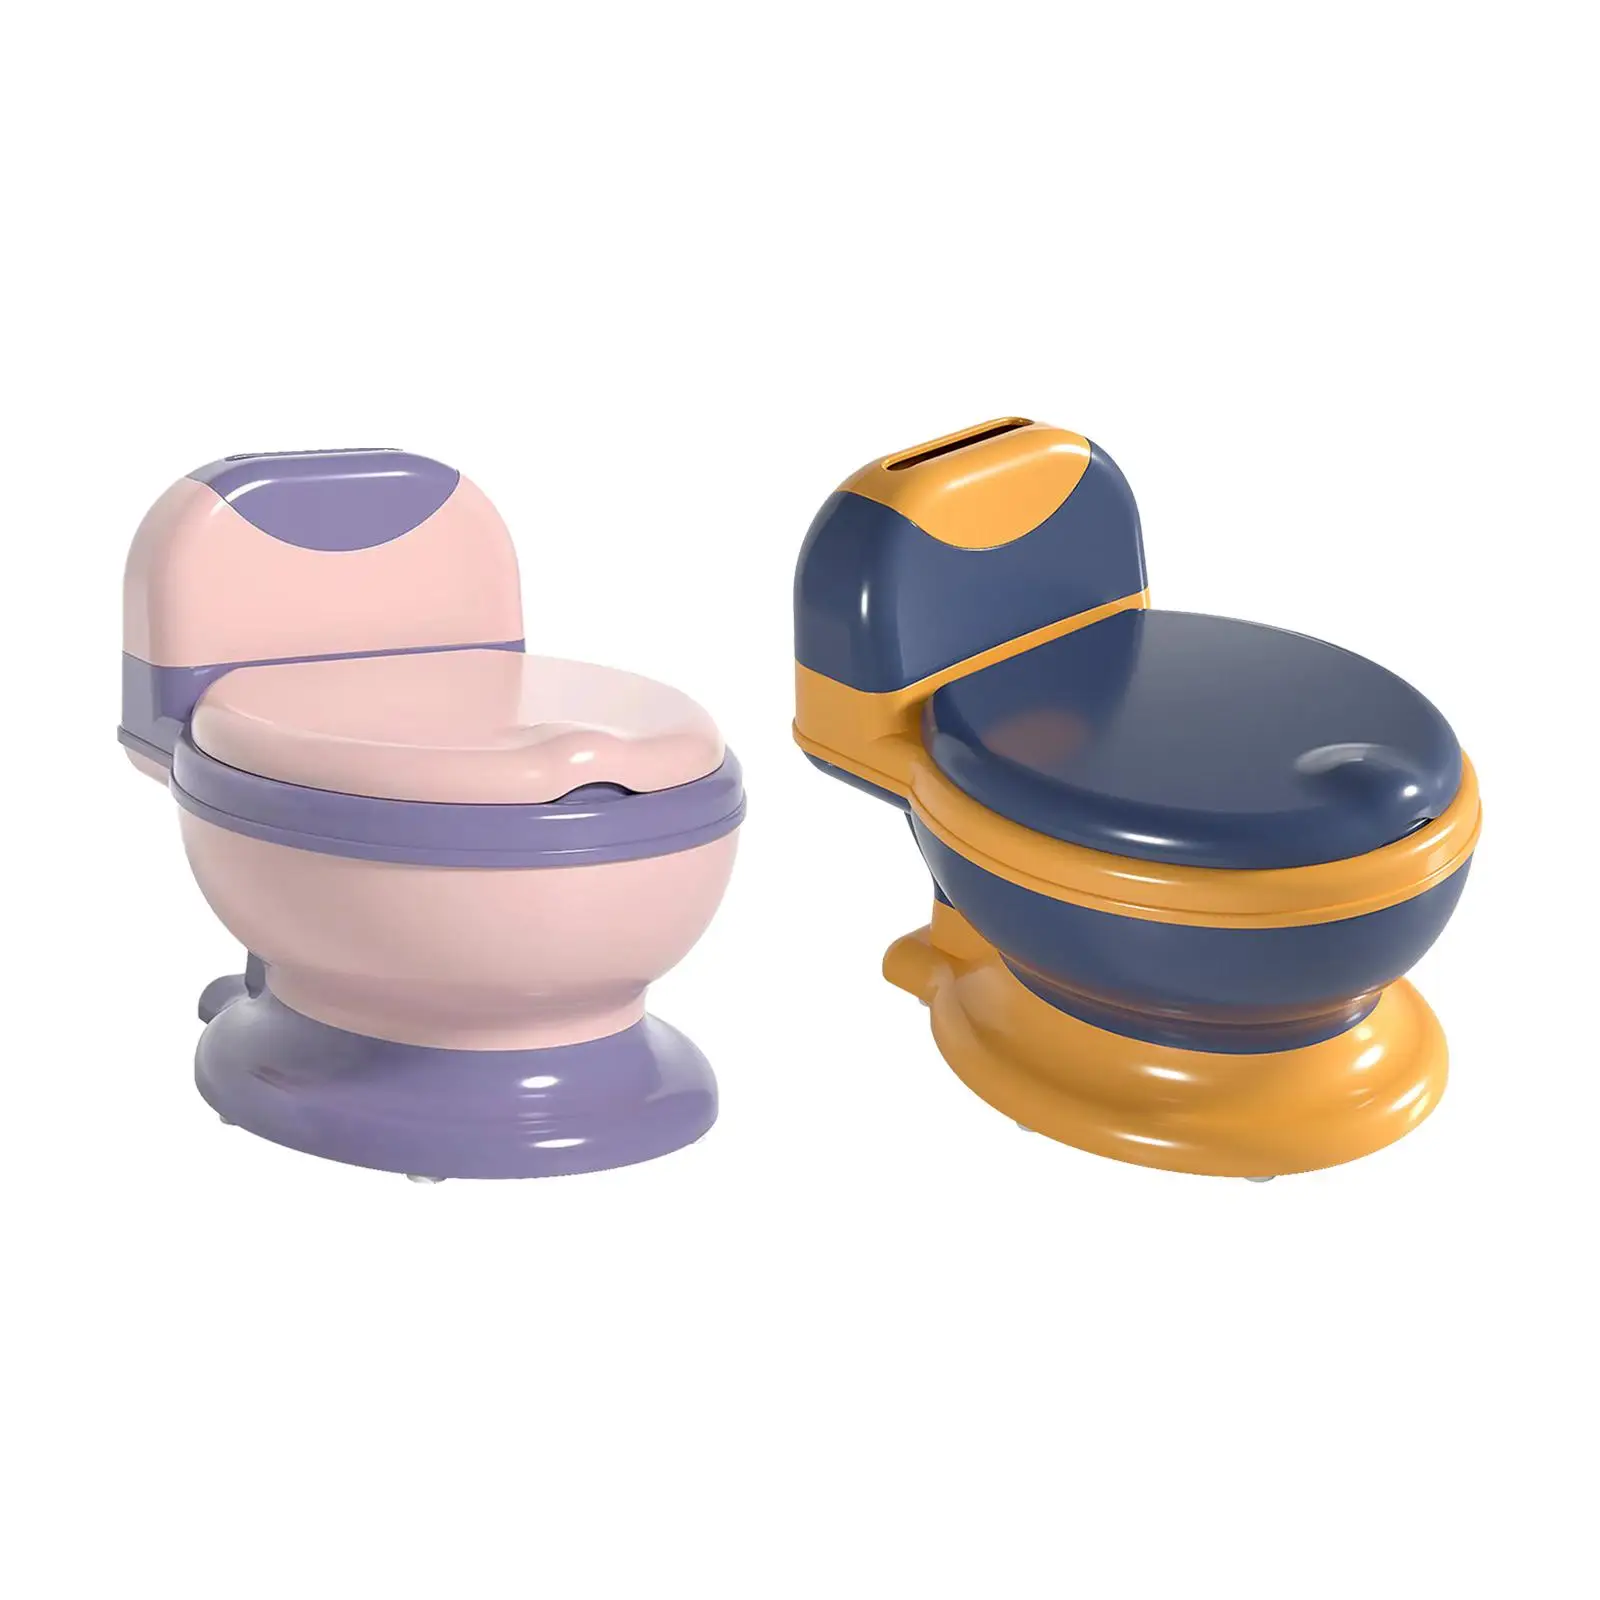 Potty Train Toilet Potty Train Seat Portable Real Feel Potty Toddlers Potty Chair for Baby Toddlers Kids Children Girls